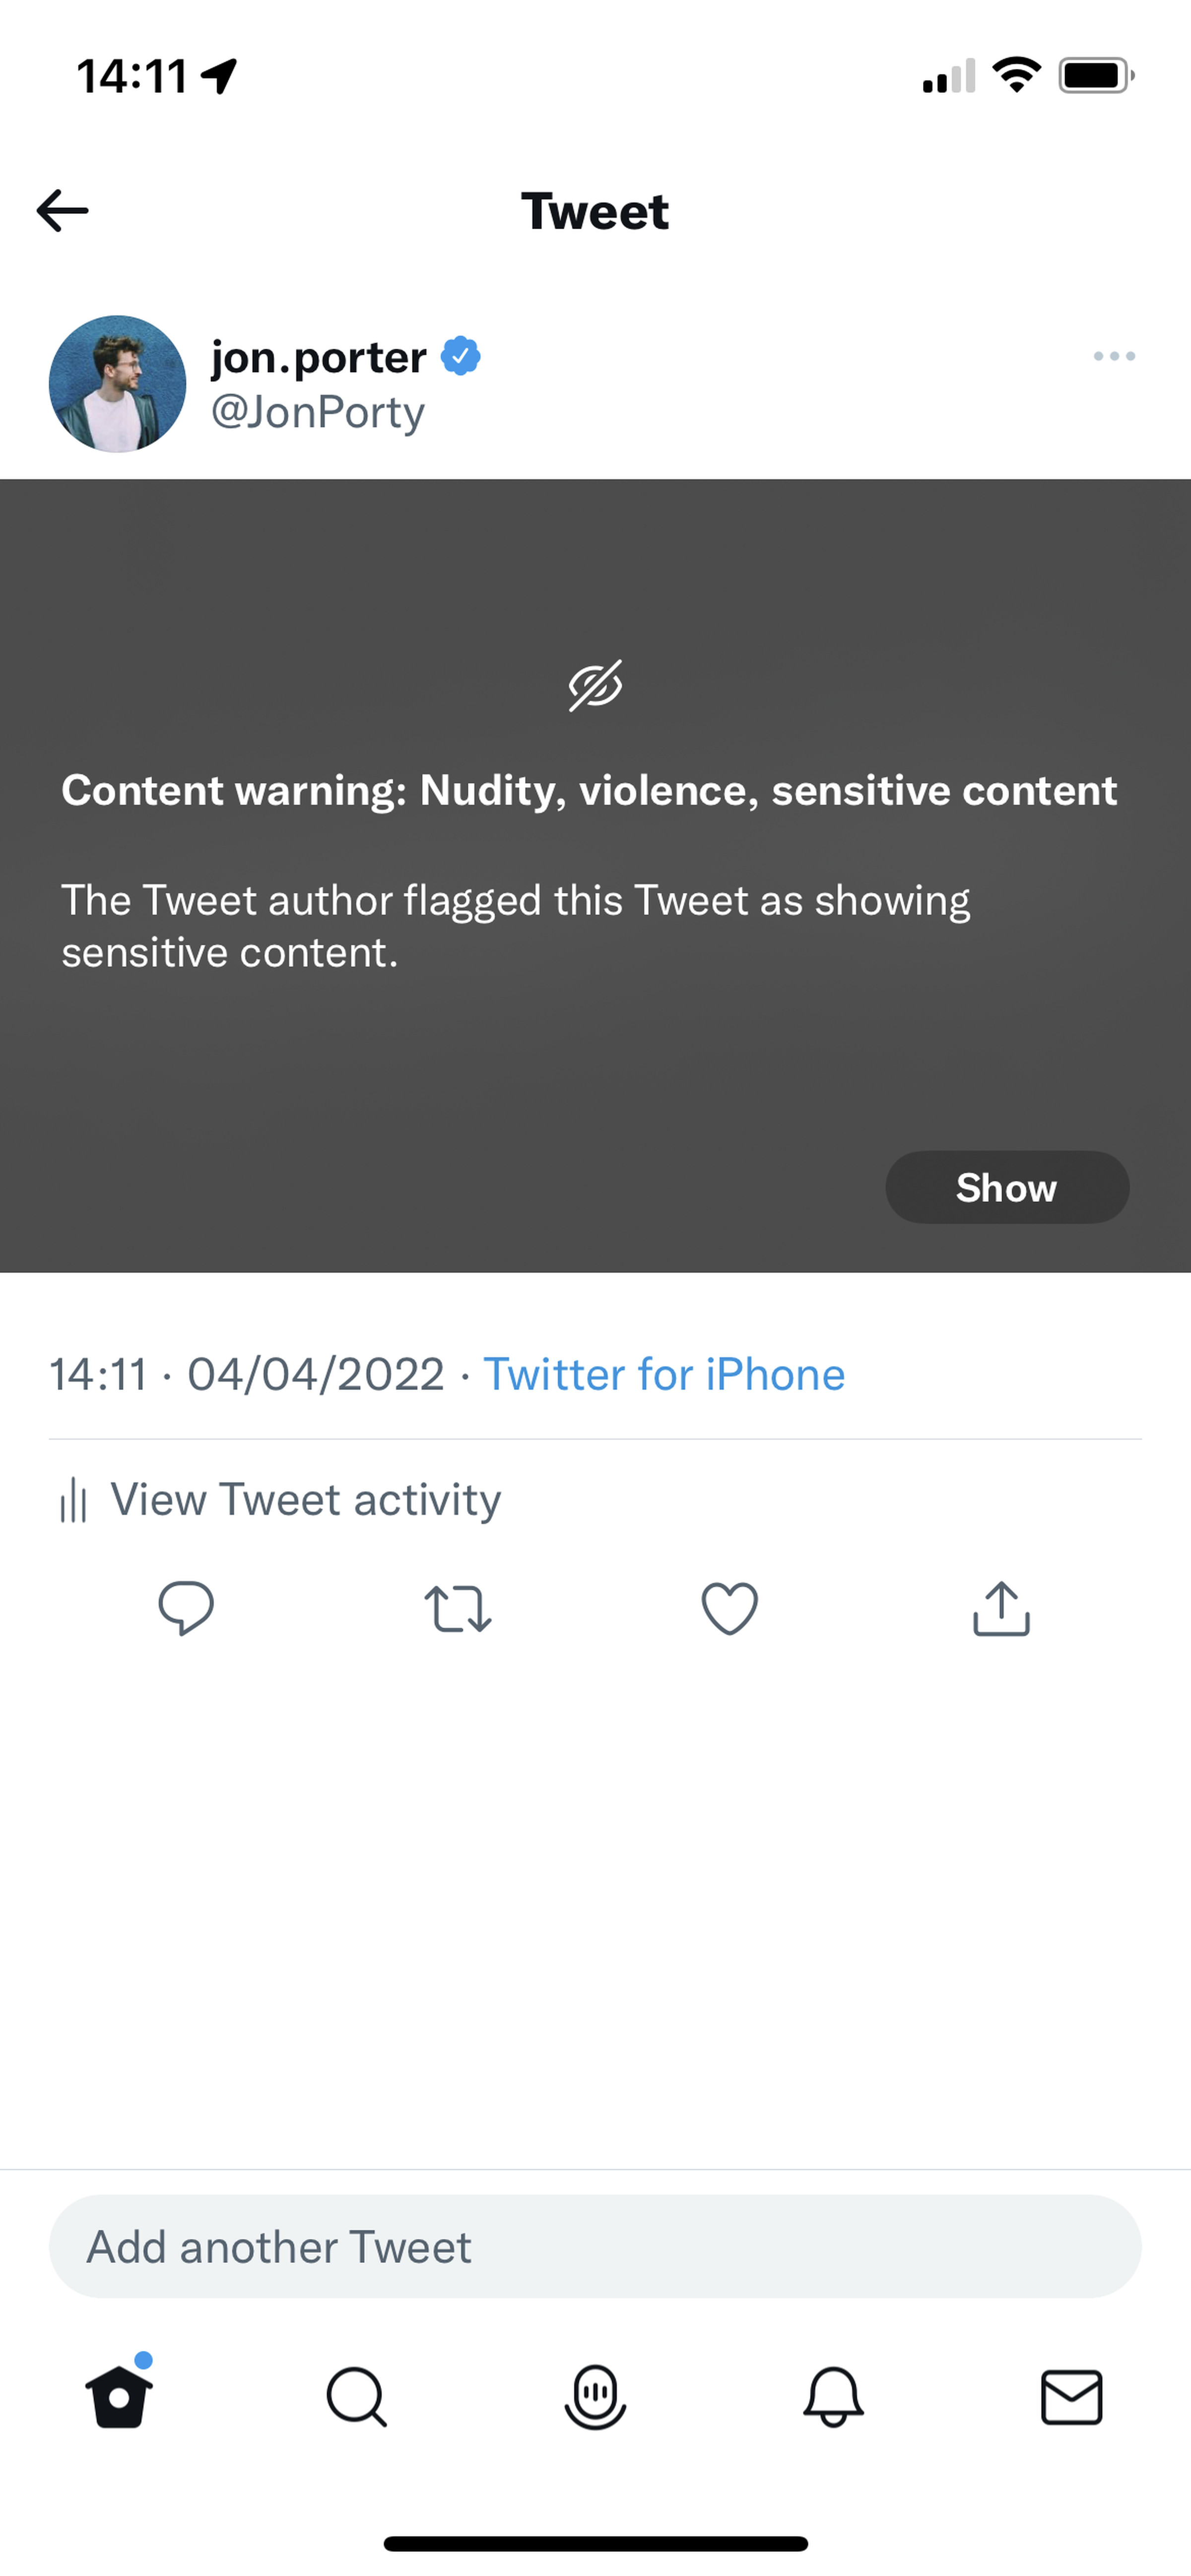 <em>Here’s how the content warning appears on Twitter.</em>